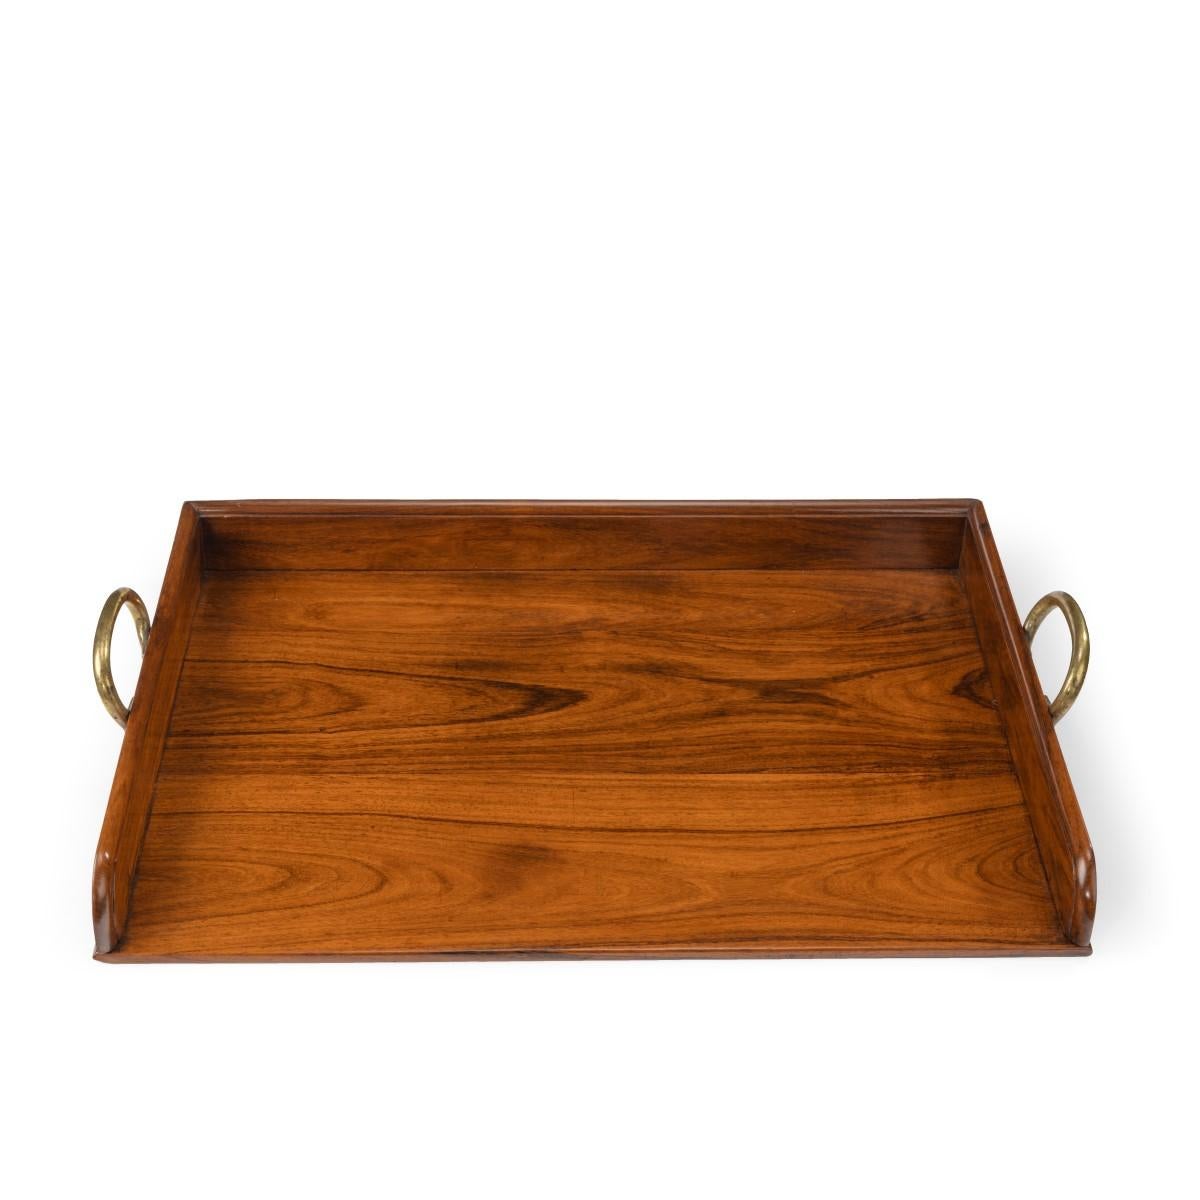 An Anglo-English padouk open butler’s tray, with shaped brass handles, open on one side, circa 1800.